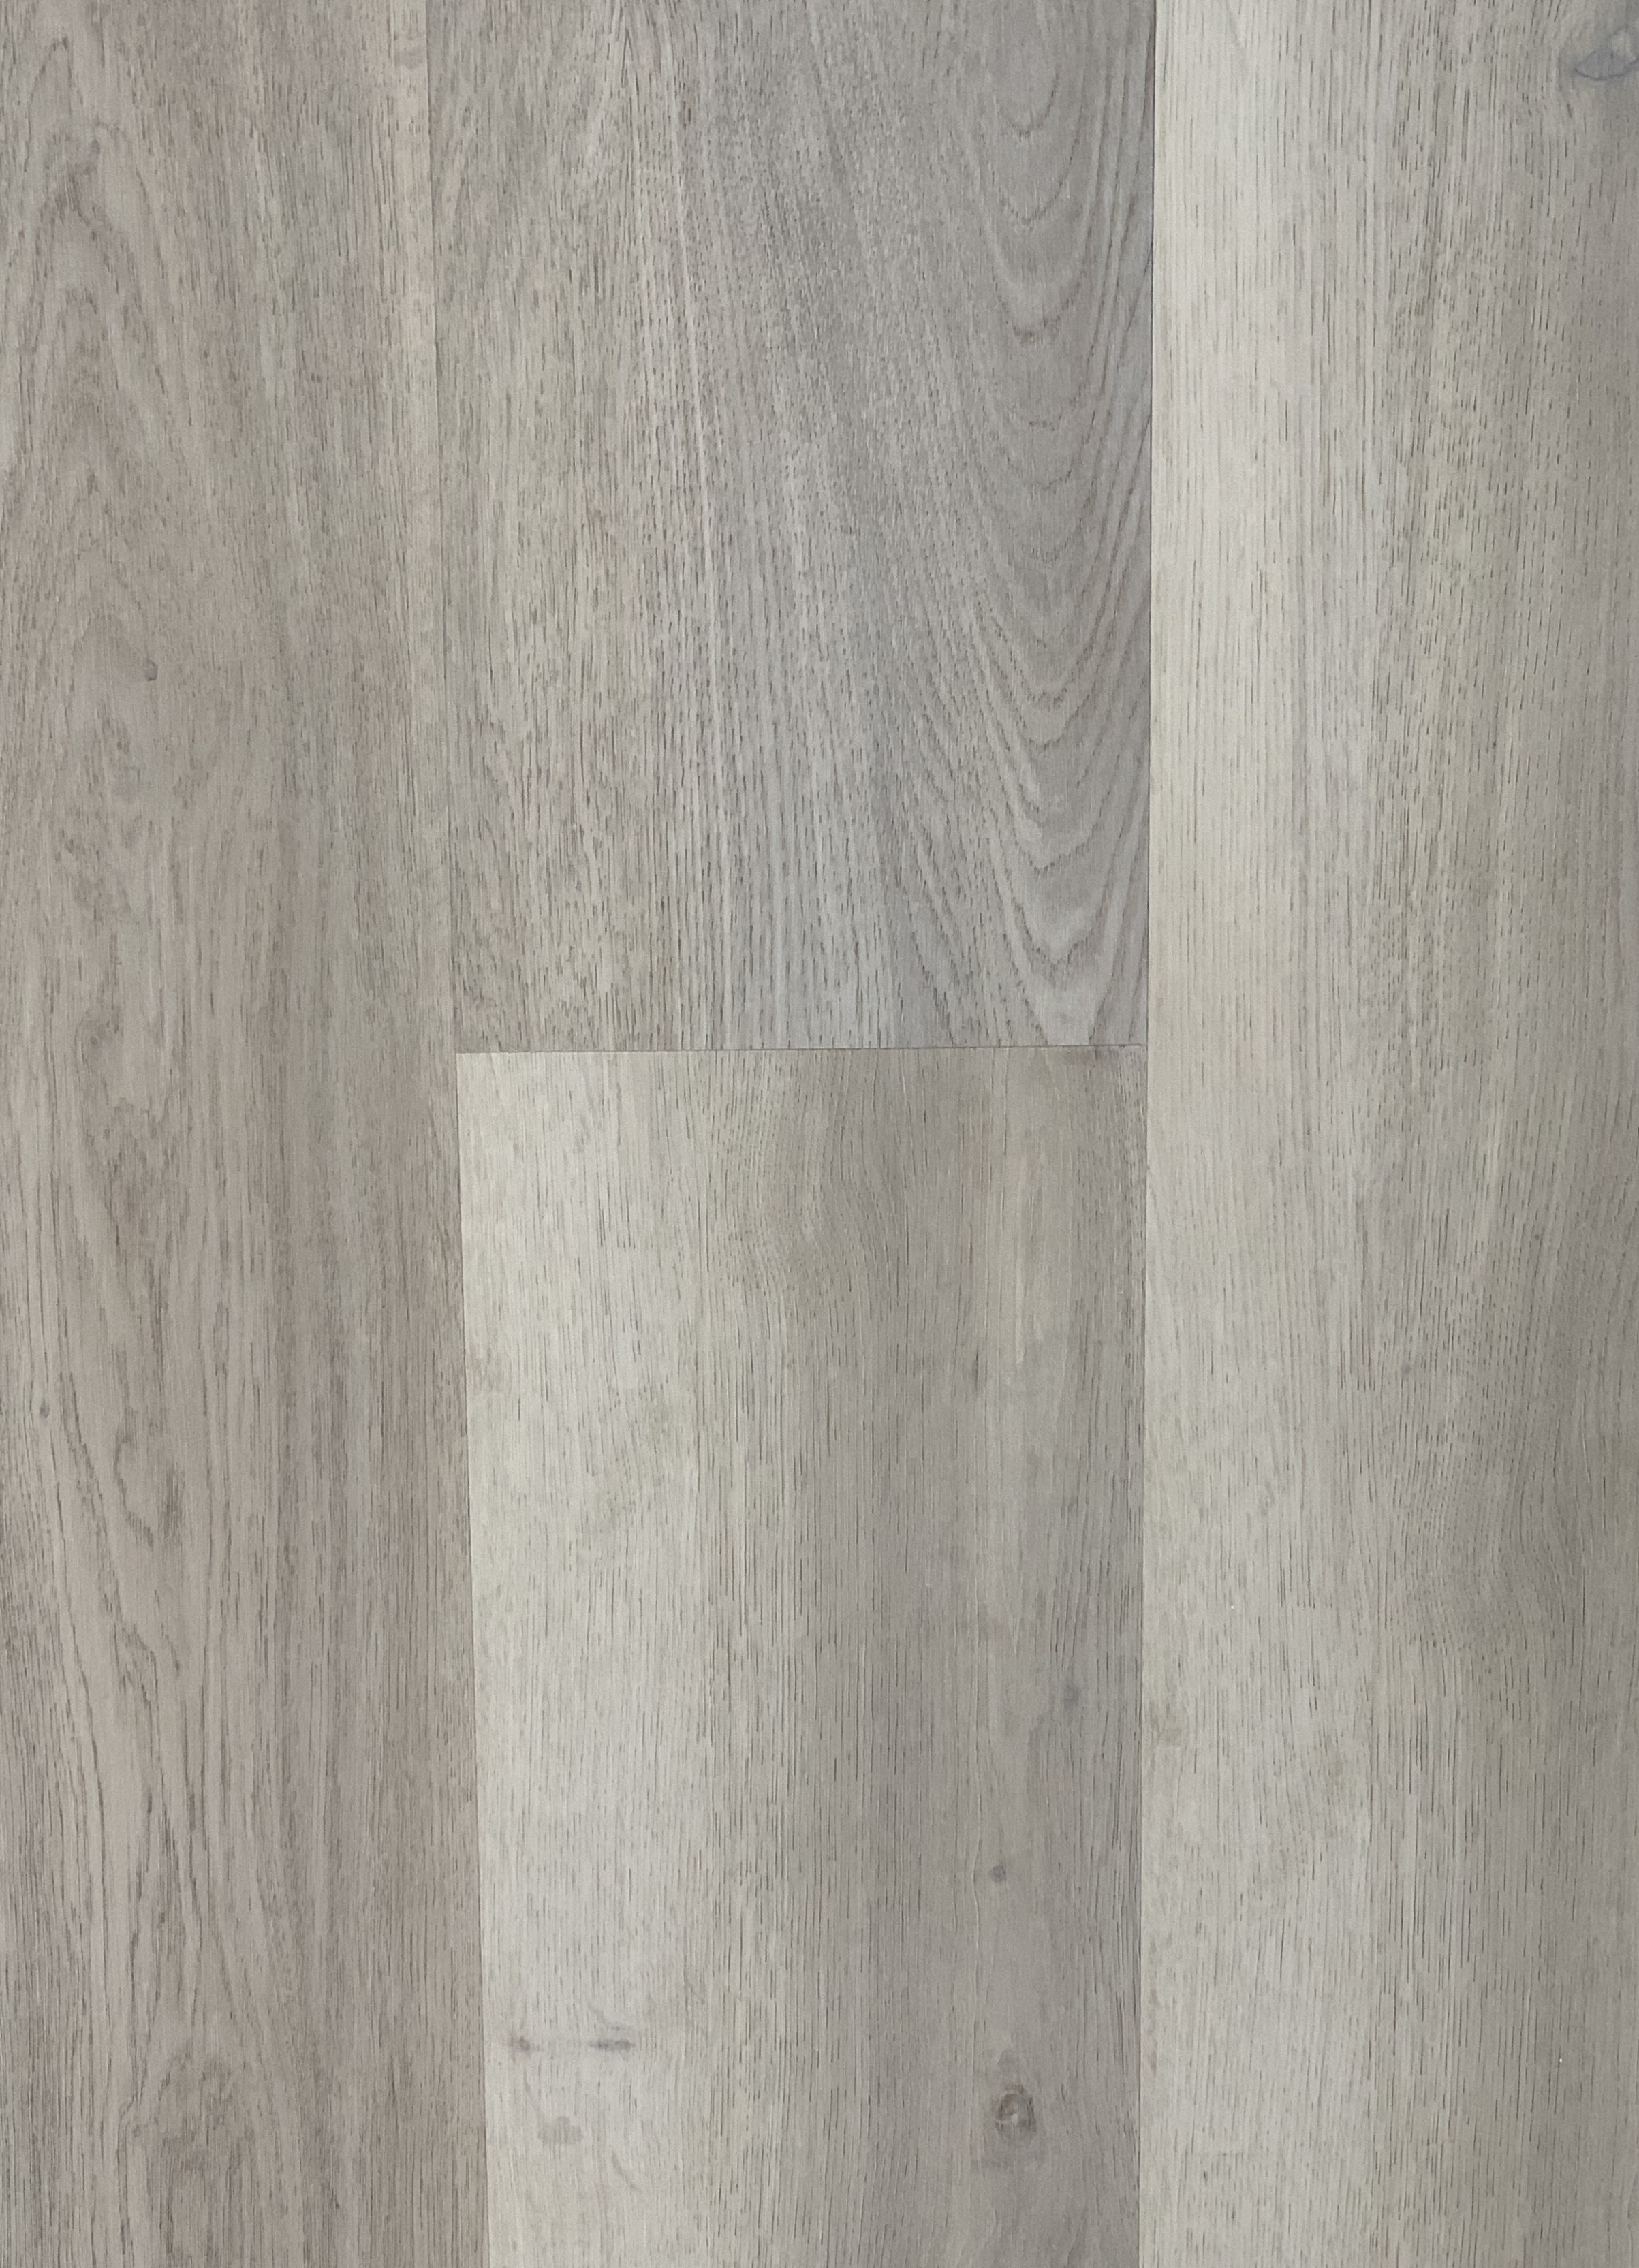 Hybrid flooring suppliers Toasty Grey product